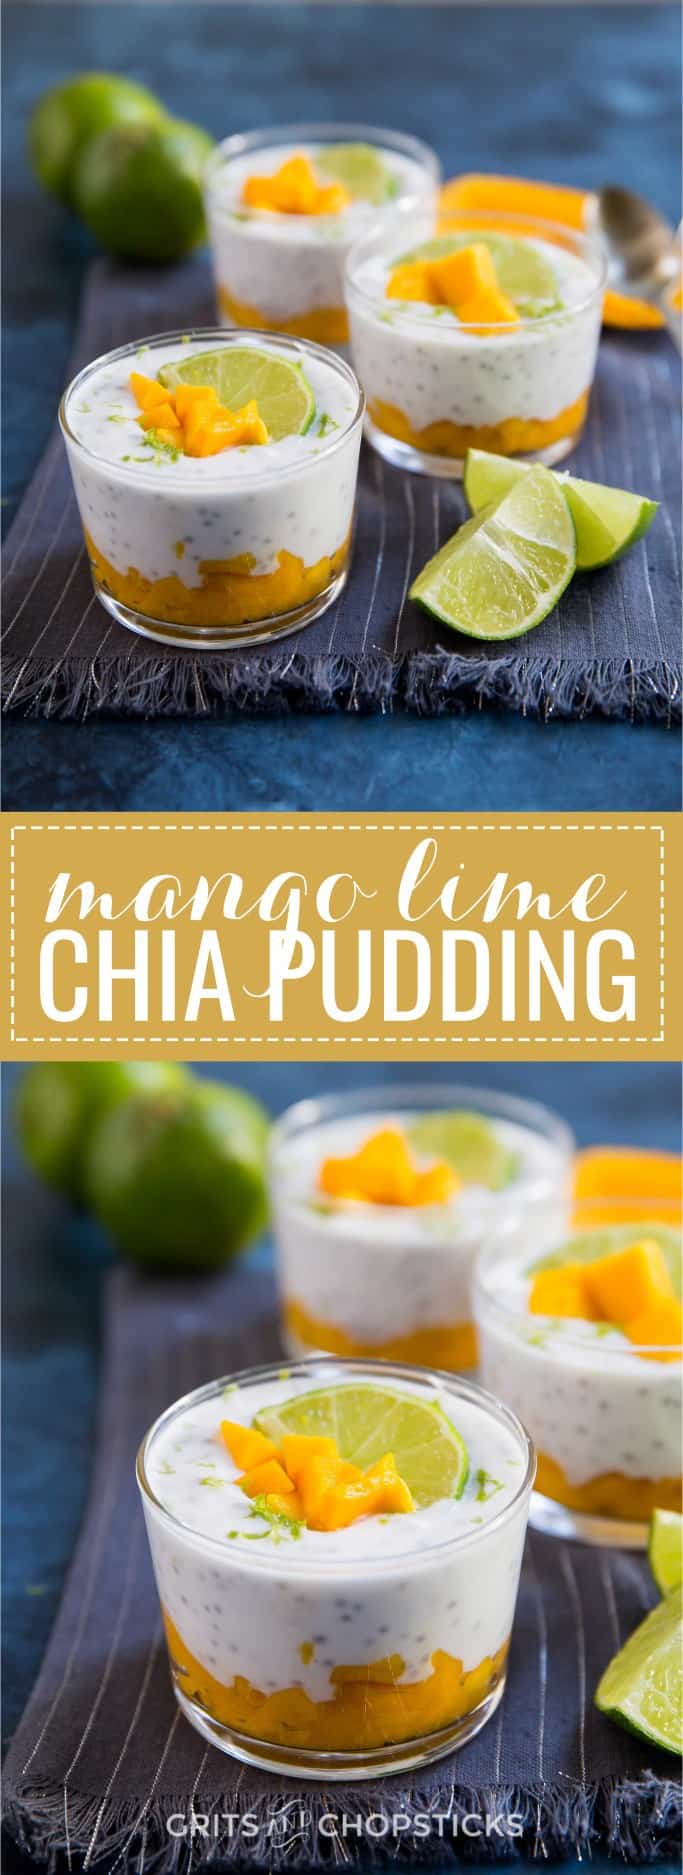 This mango lime chia pudding is Whole30/paleo compliant, beautiful to look at, and so very tasty!